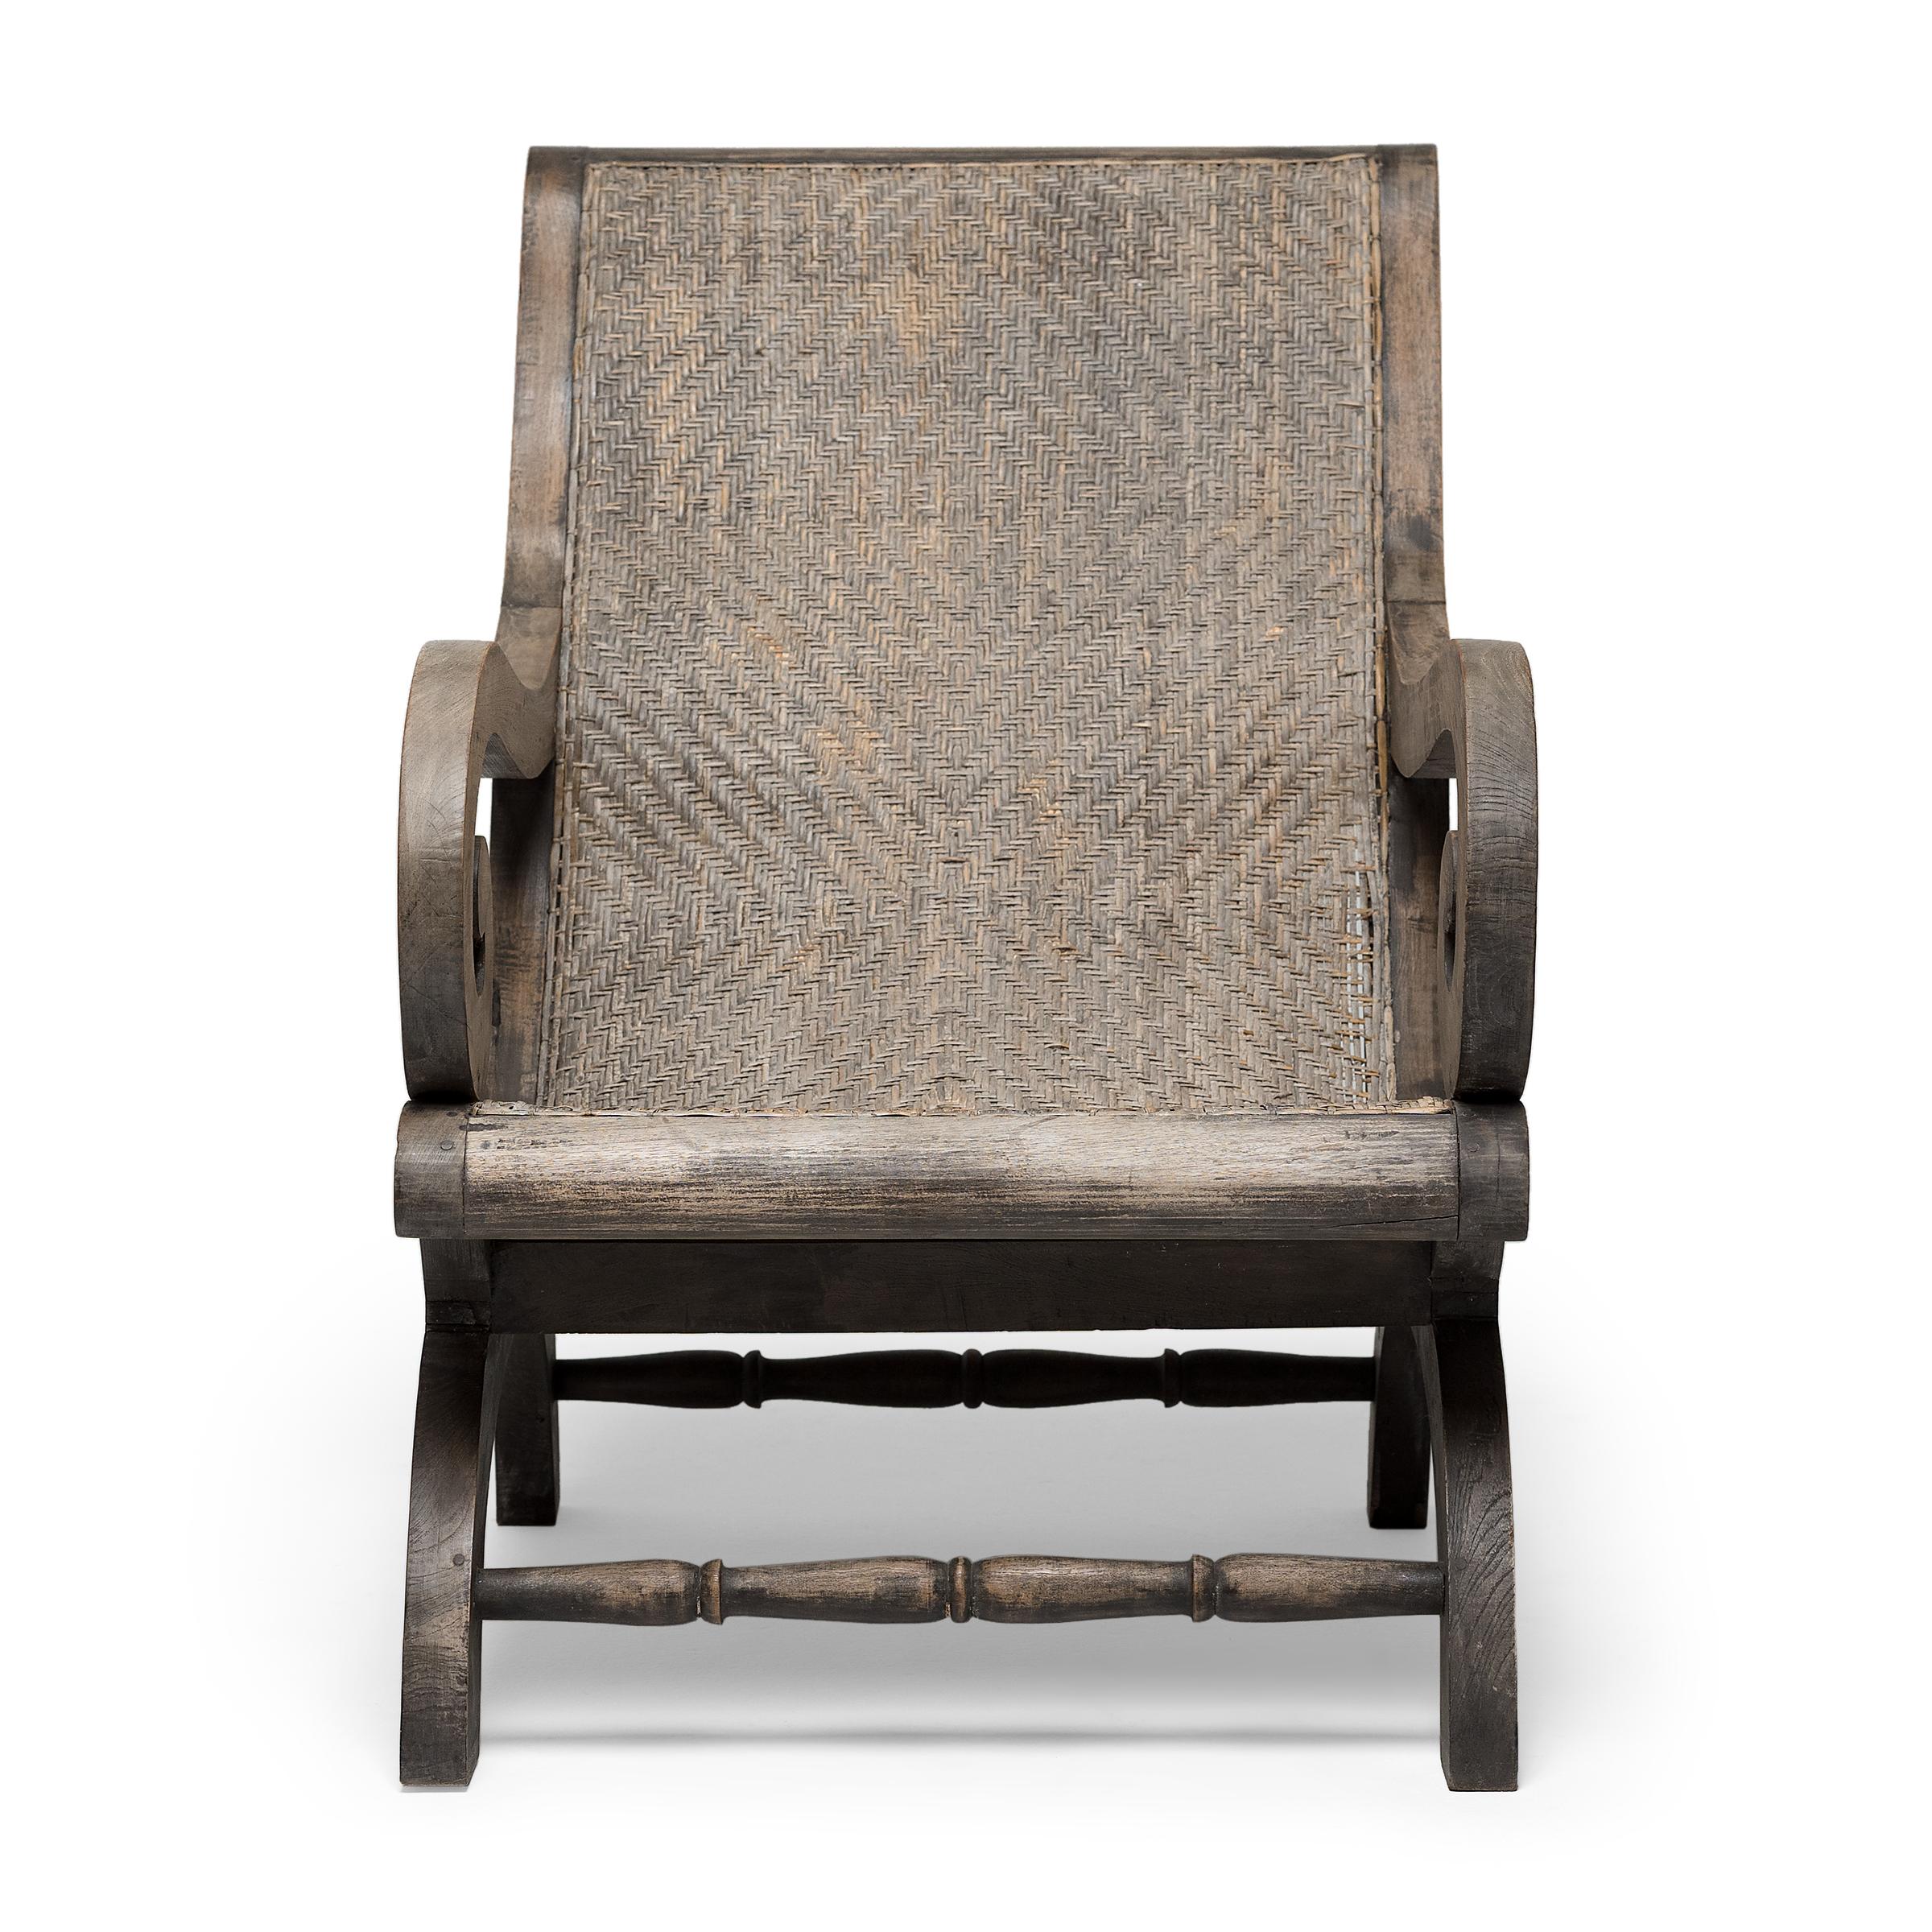 This woven rattan armchair recalls the Grand British Colonial style of the early 20th century, combining refined British interiors with natural Indian aesthetics. The plantation chair is characterized by its teak frame, deep seat and long sloping